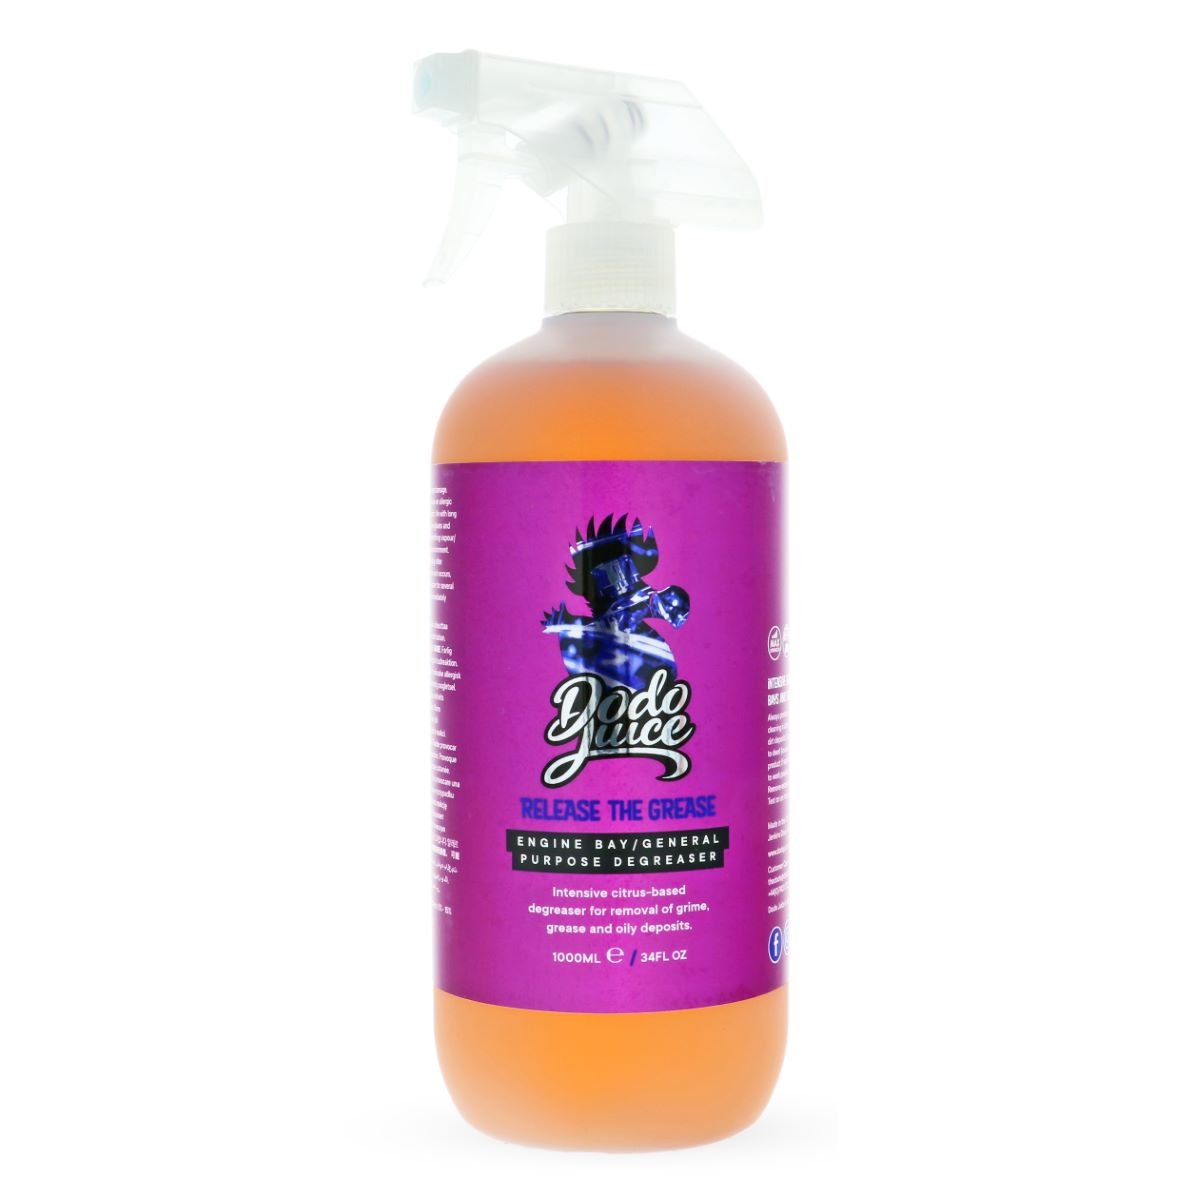 Release the Grease Engine Bay & General Purpose Degreaser - 1000ml